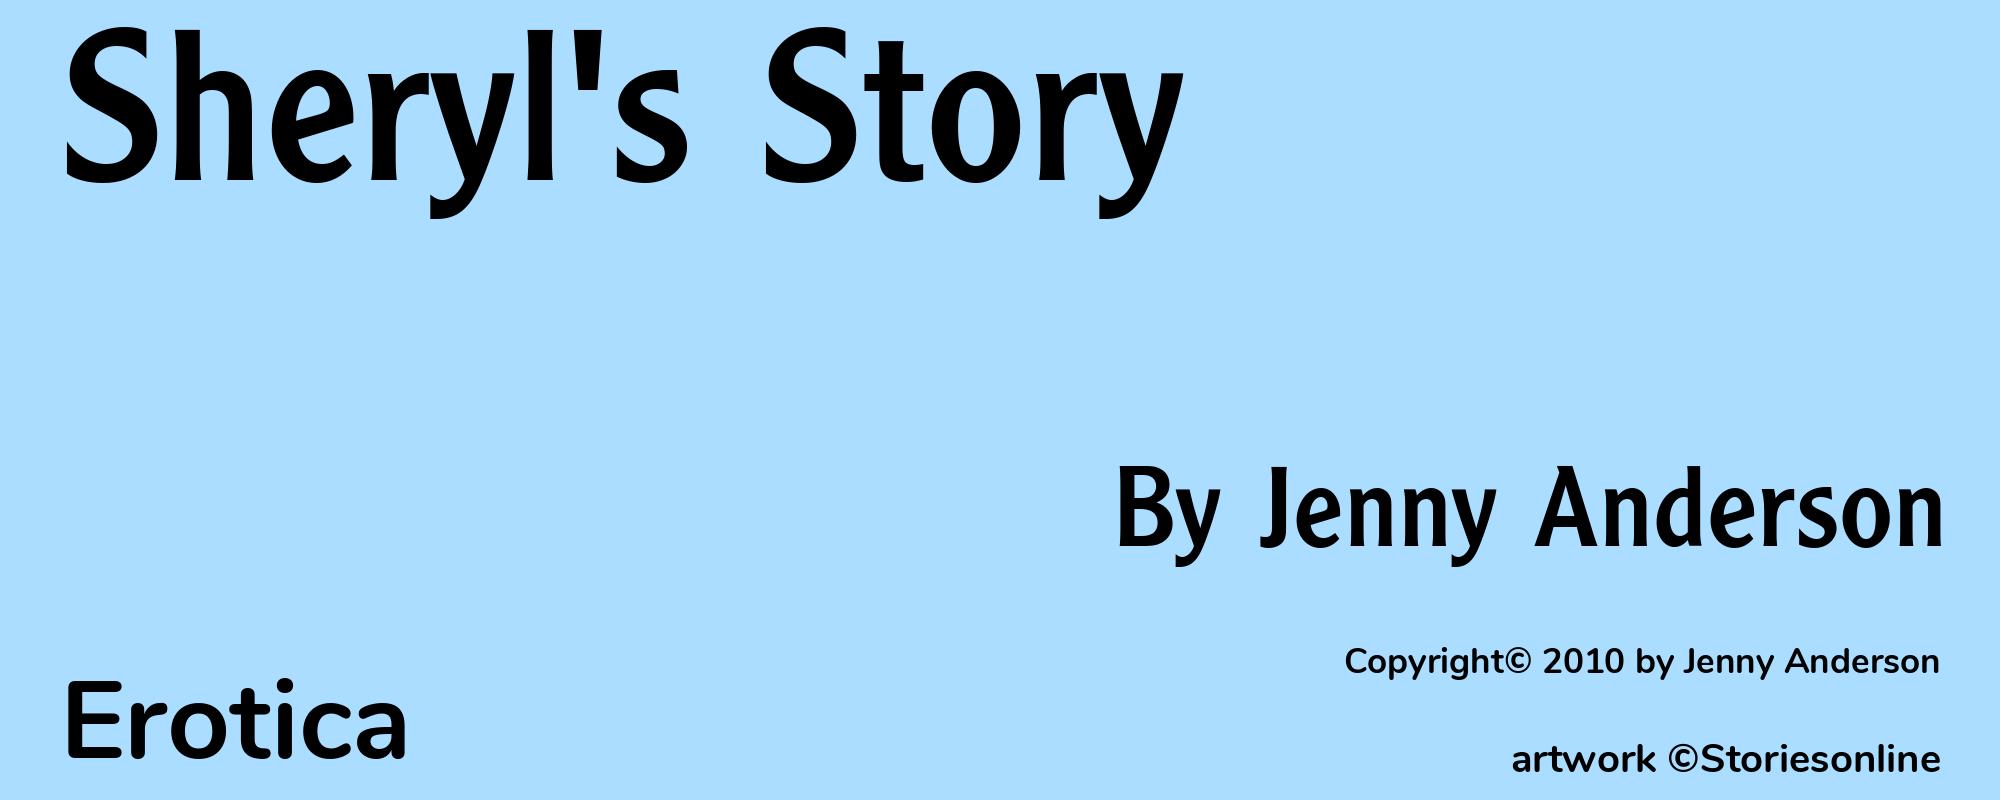 Sheryl's Story - Cover